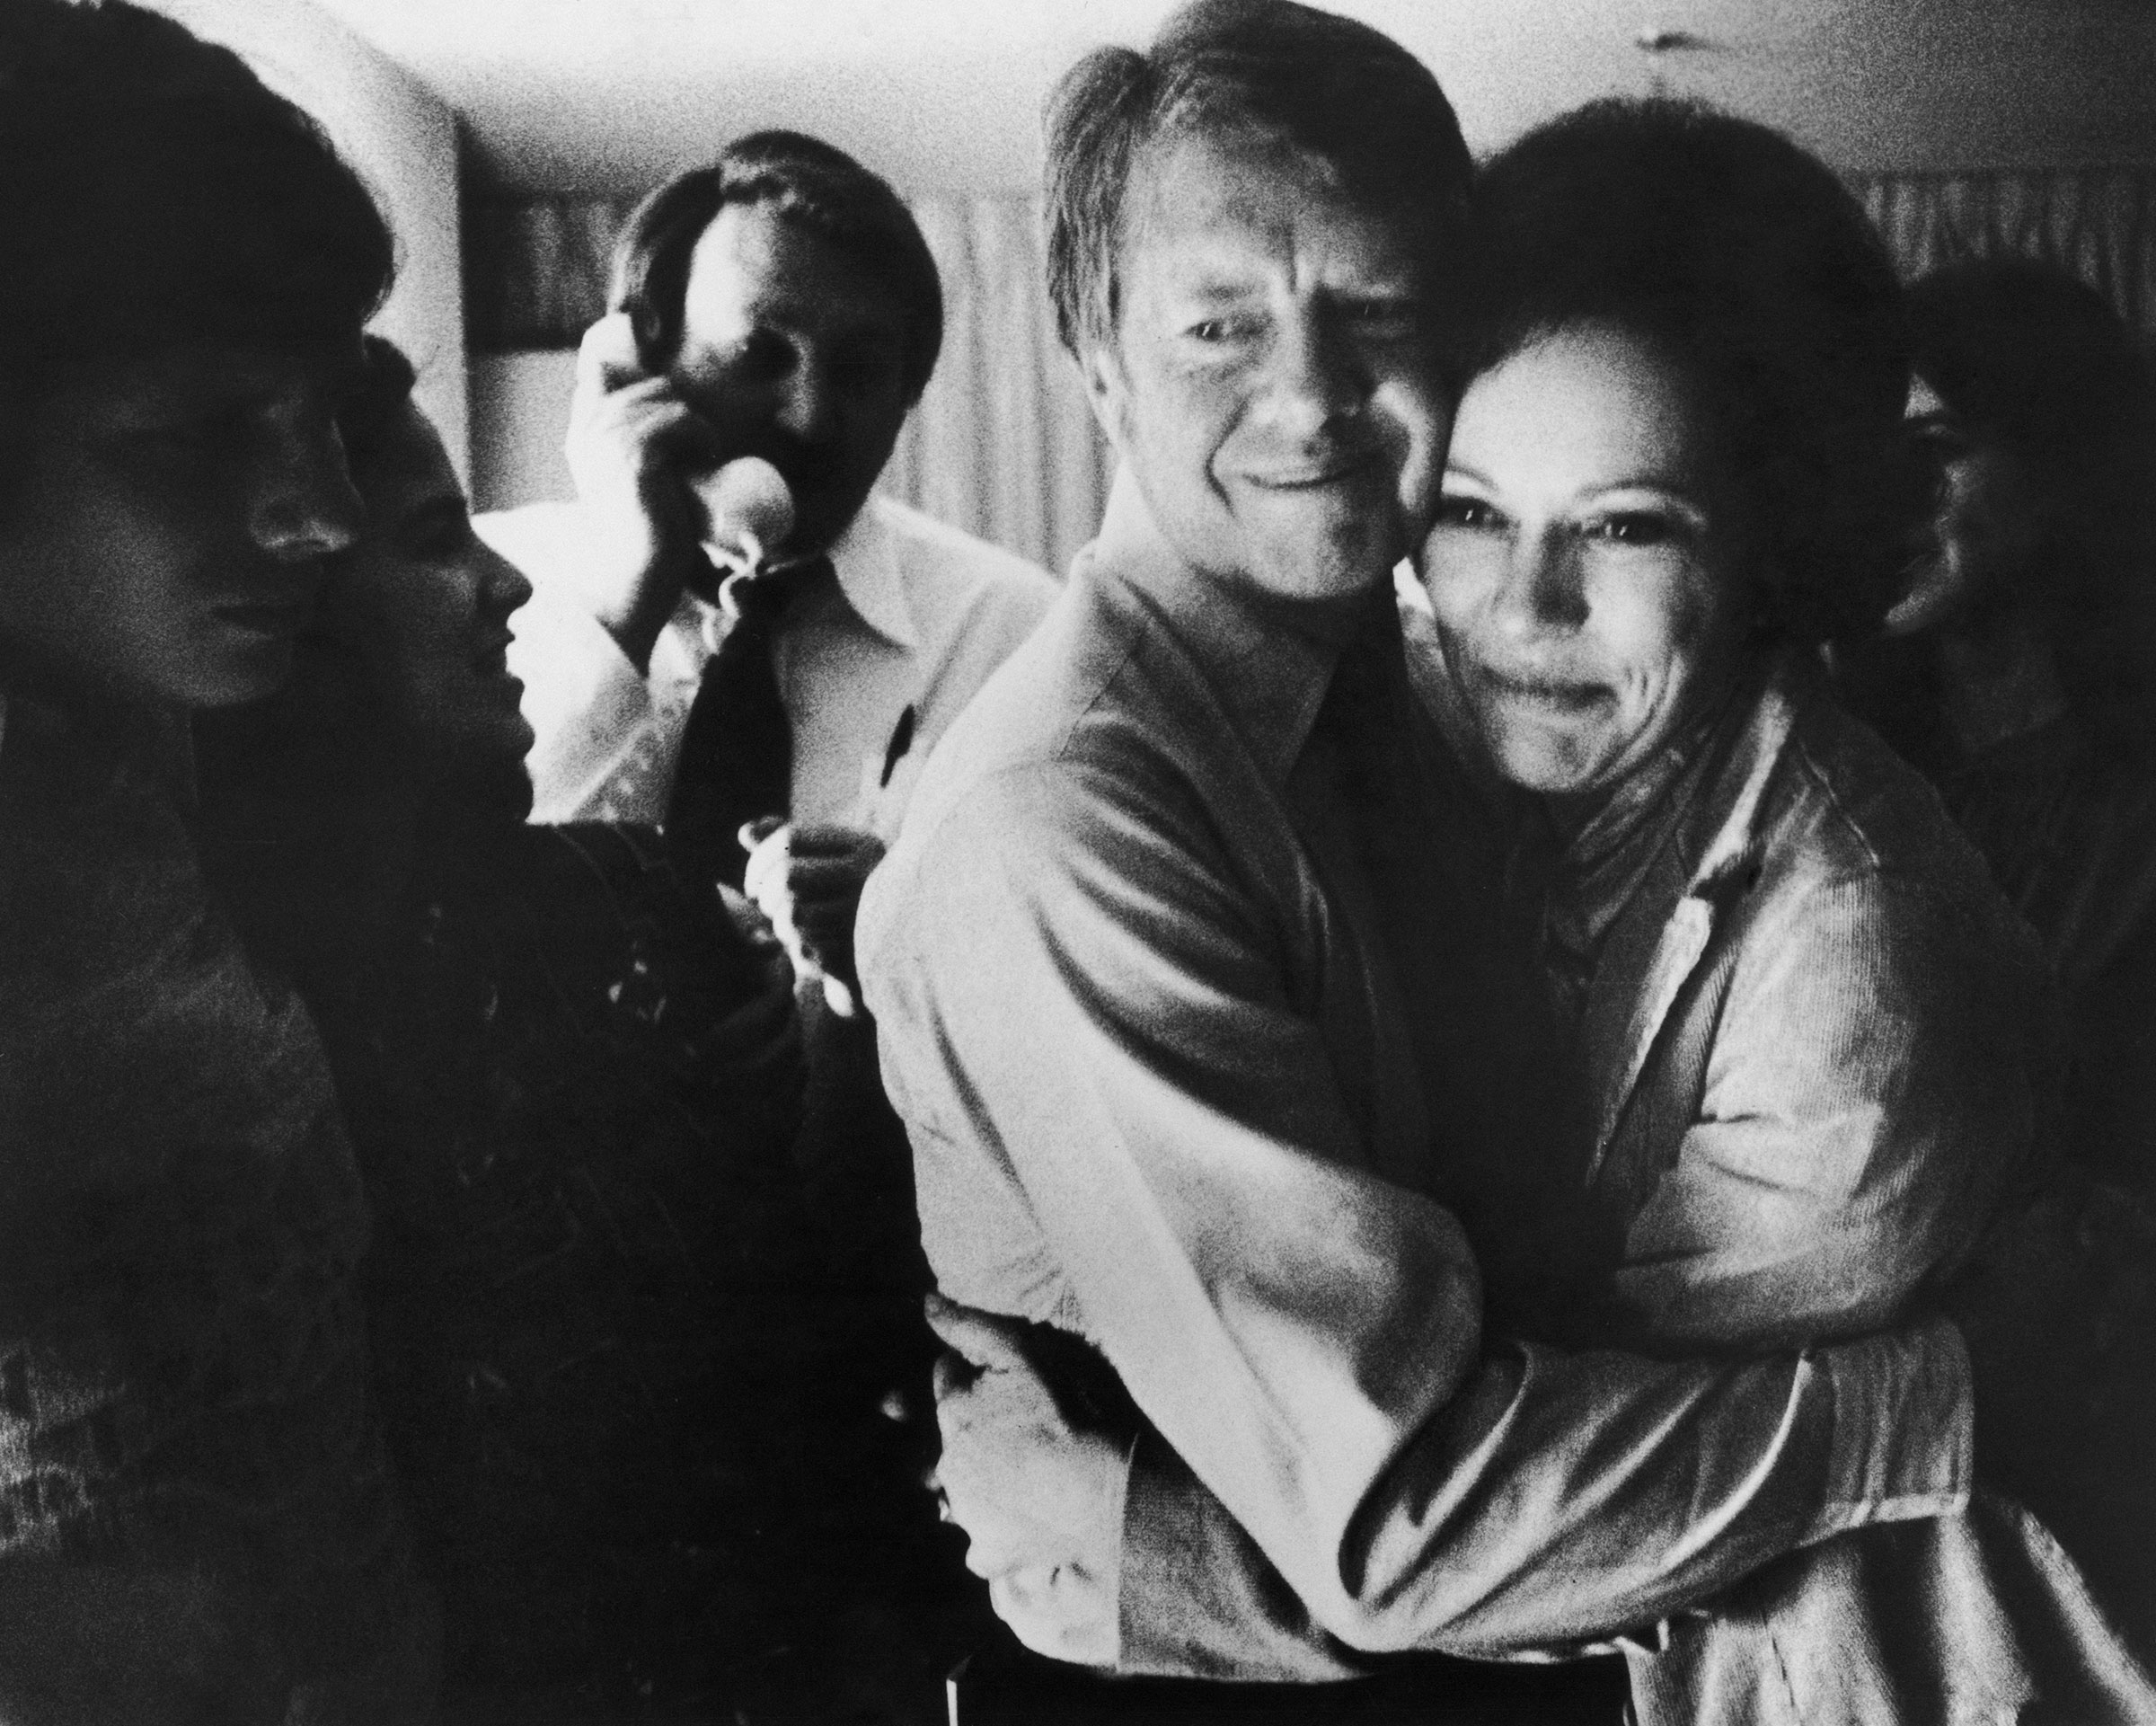 Jimmy Carter embraces Rosalynn after receiving the final news of his victory in the national general election, on Nov. 2, 1976. (Hulton Archive/Getty Images)